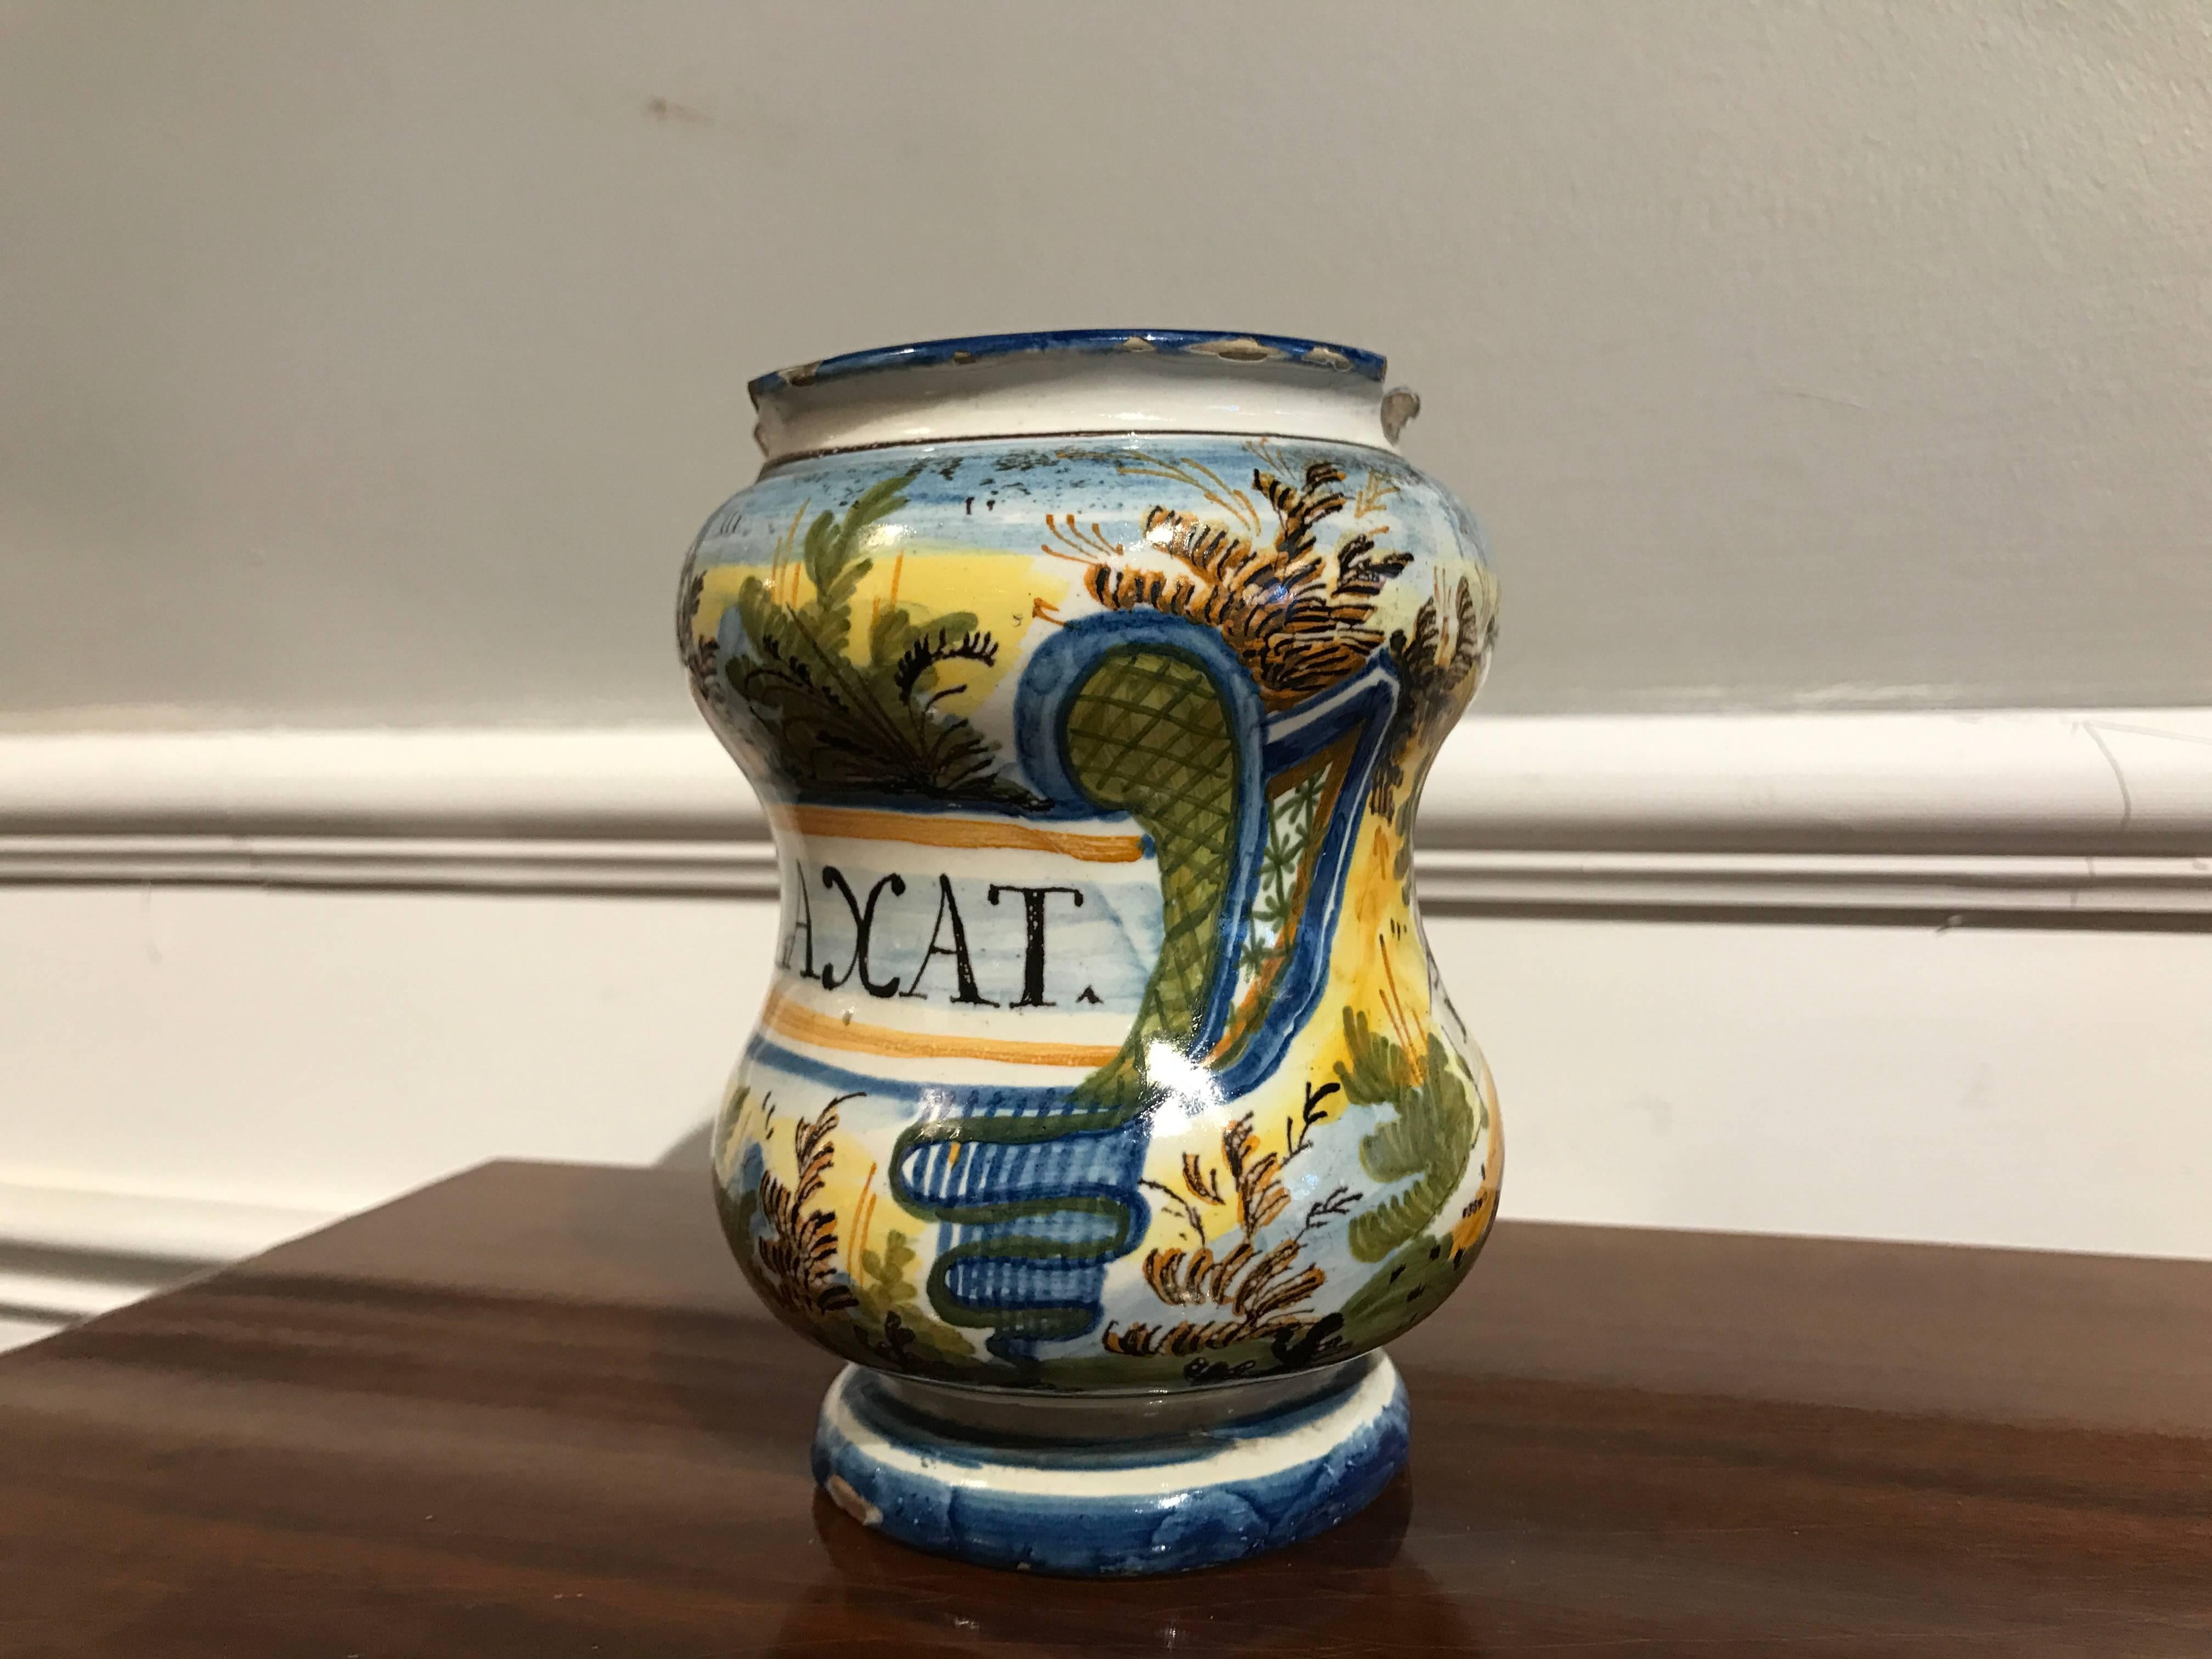 An Italian Baroque Castelli albarllo, also known as a pharmacy or drug jar. It held 'Benedict Laxat' listed as far back as Aristotle as a medication used in by midwives. Beautifully decorated with buildings in landscapes in the free, almost